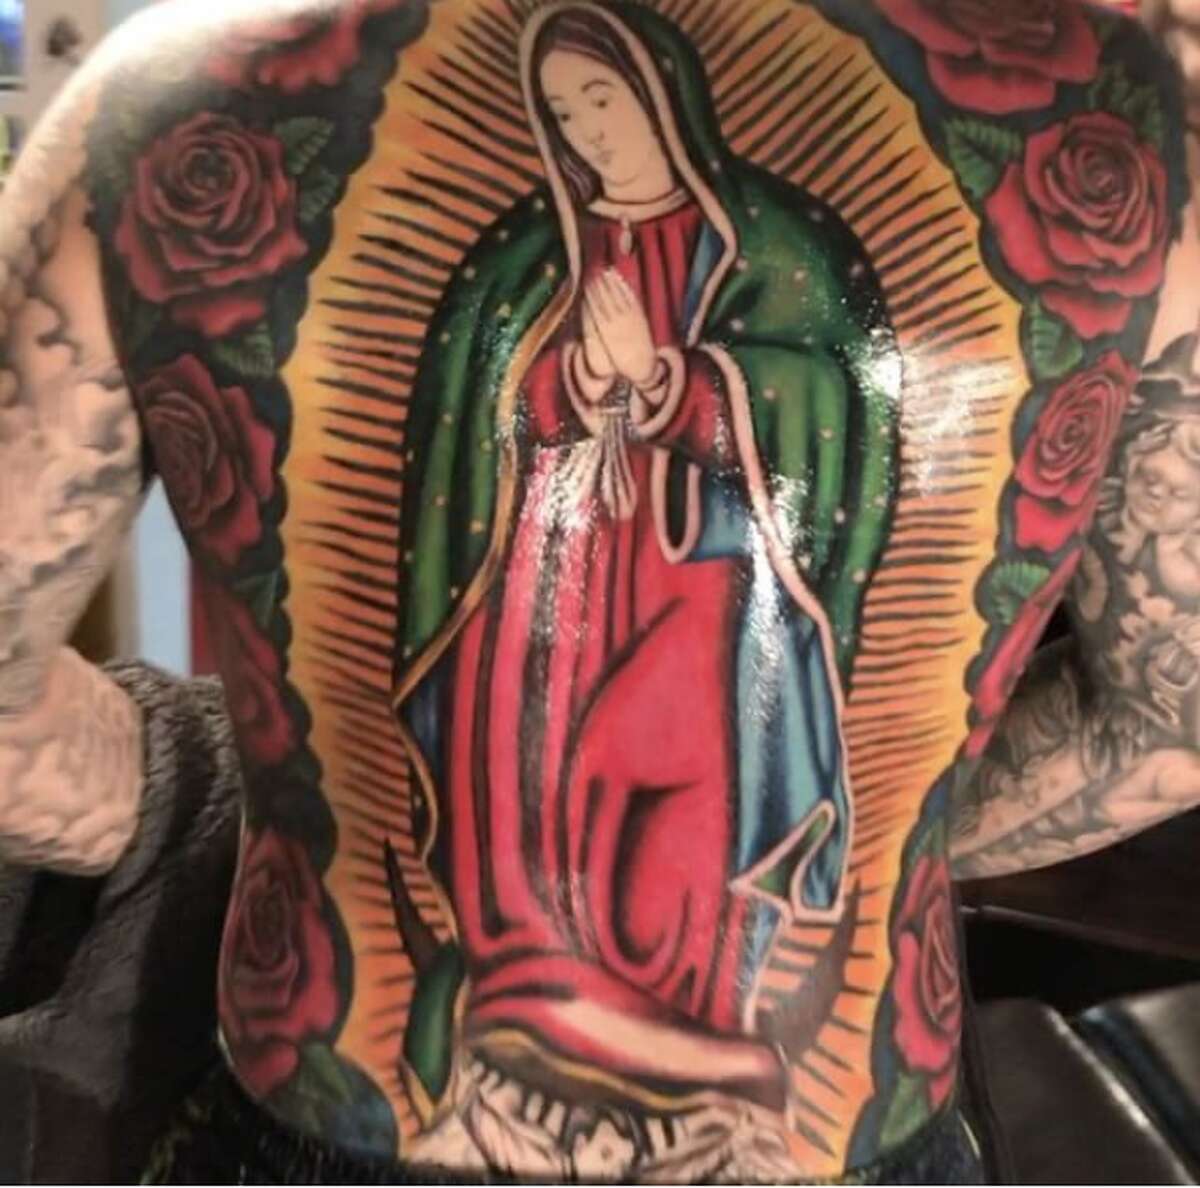 Texas Taboo Tattoo Artist is close to completing a Virgen de Guadalupe piece on the back of his customer Robert.